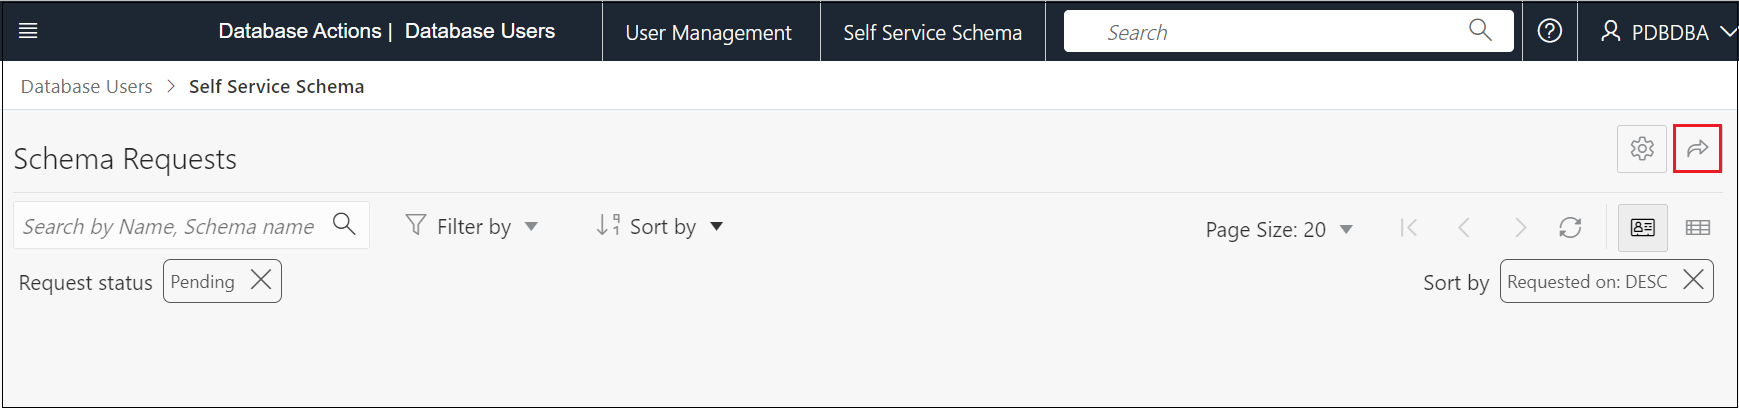 Self Service Schema tab on the Database Users page